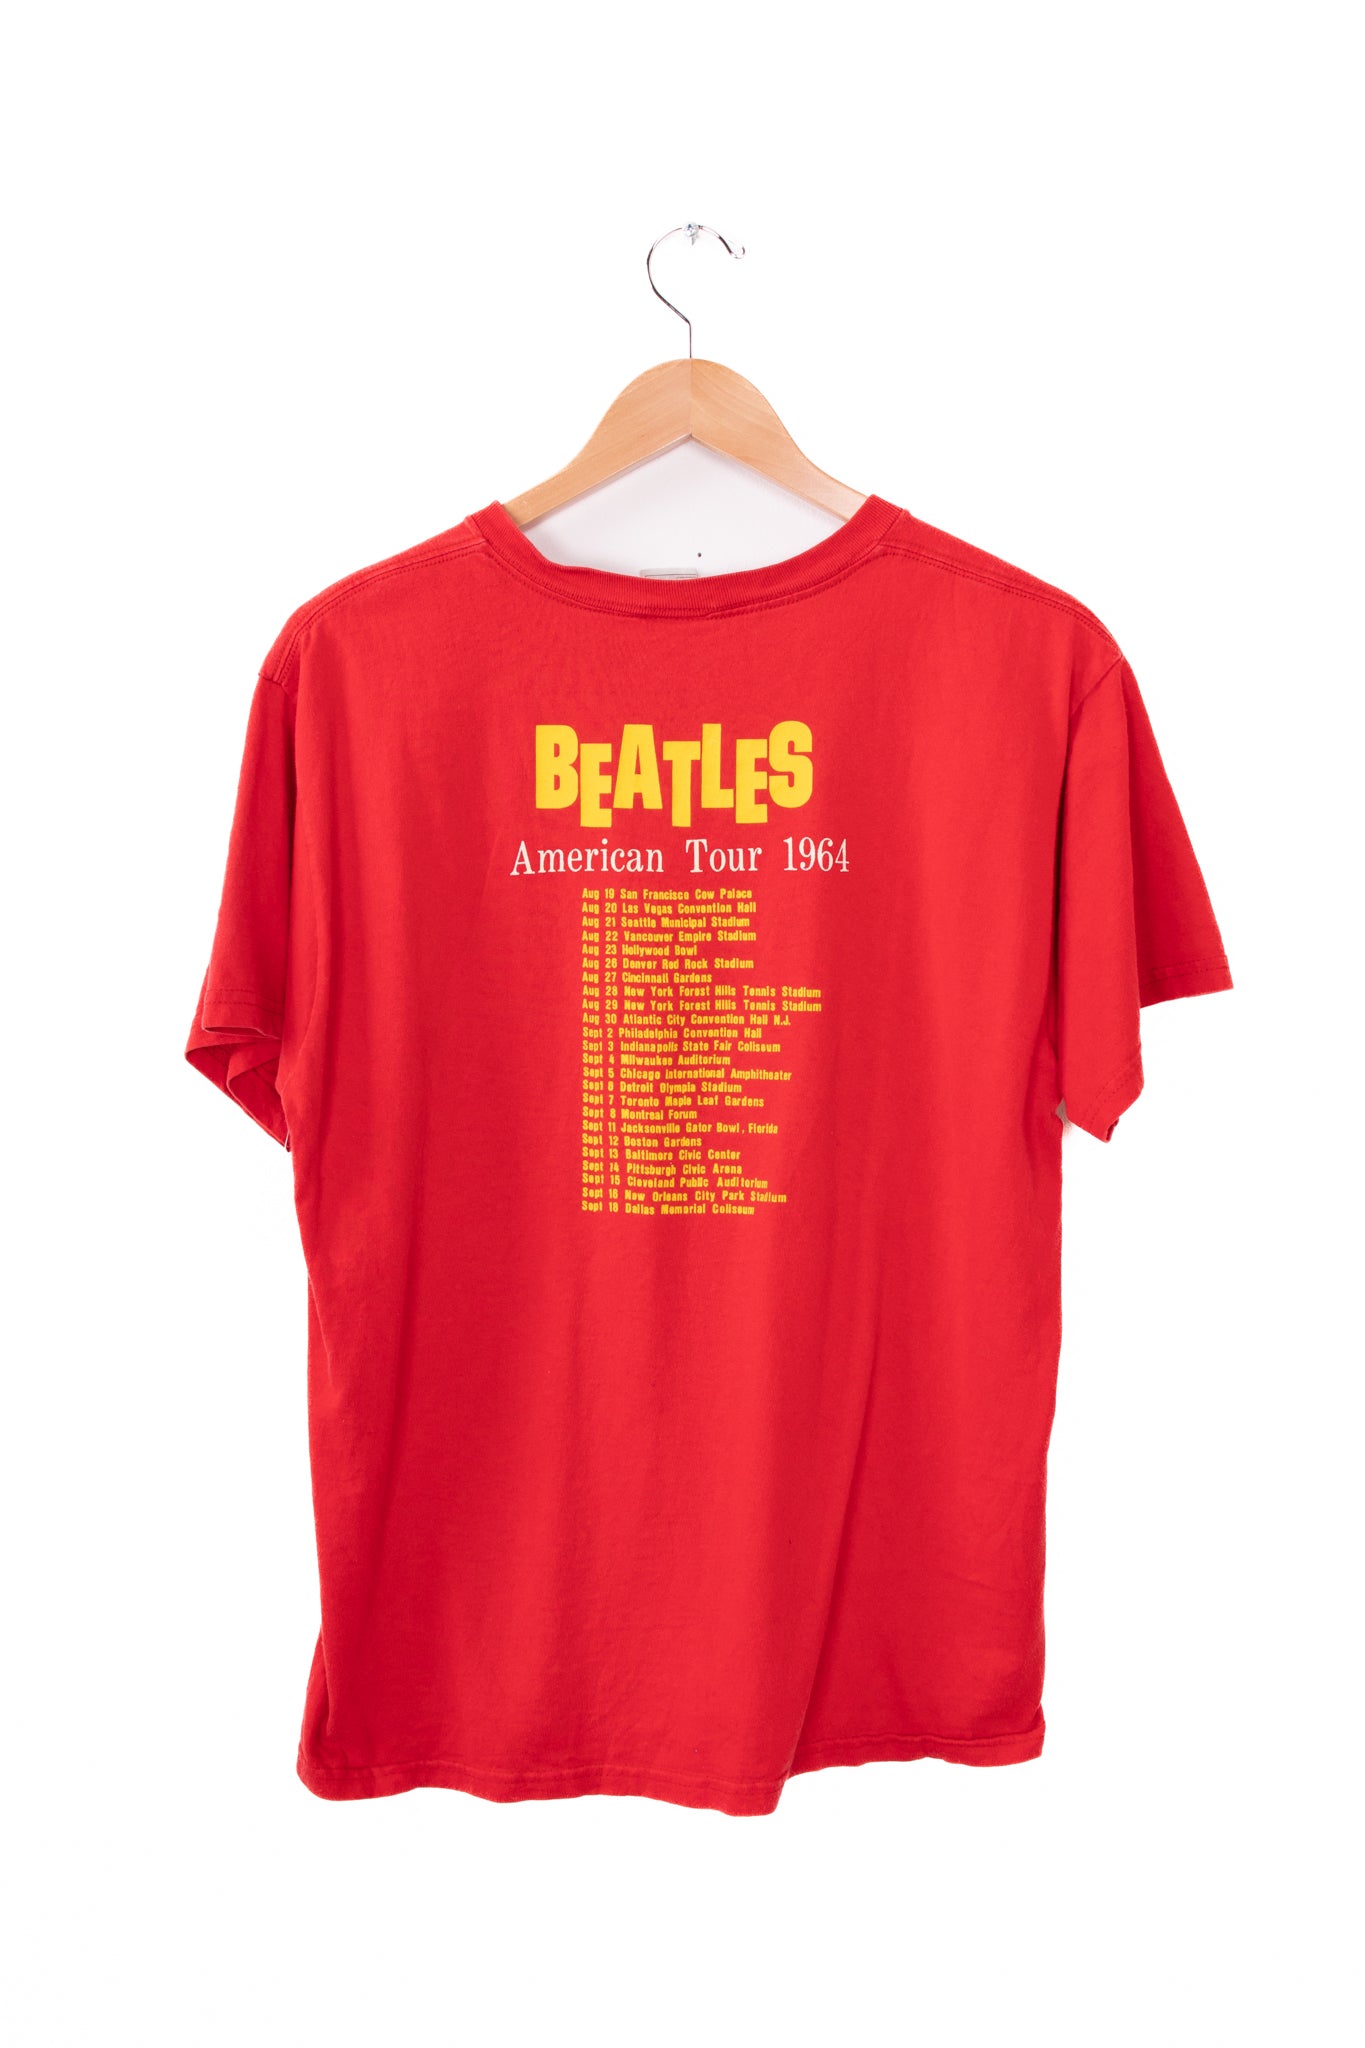 2002 The Beatles Tour 1964 Fruit of the Loom T-Shirt